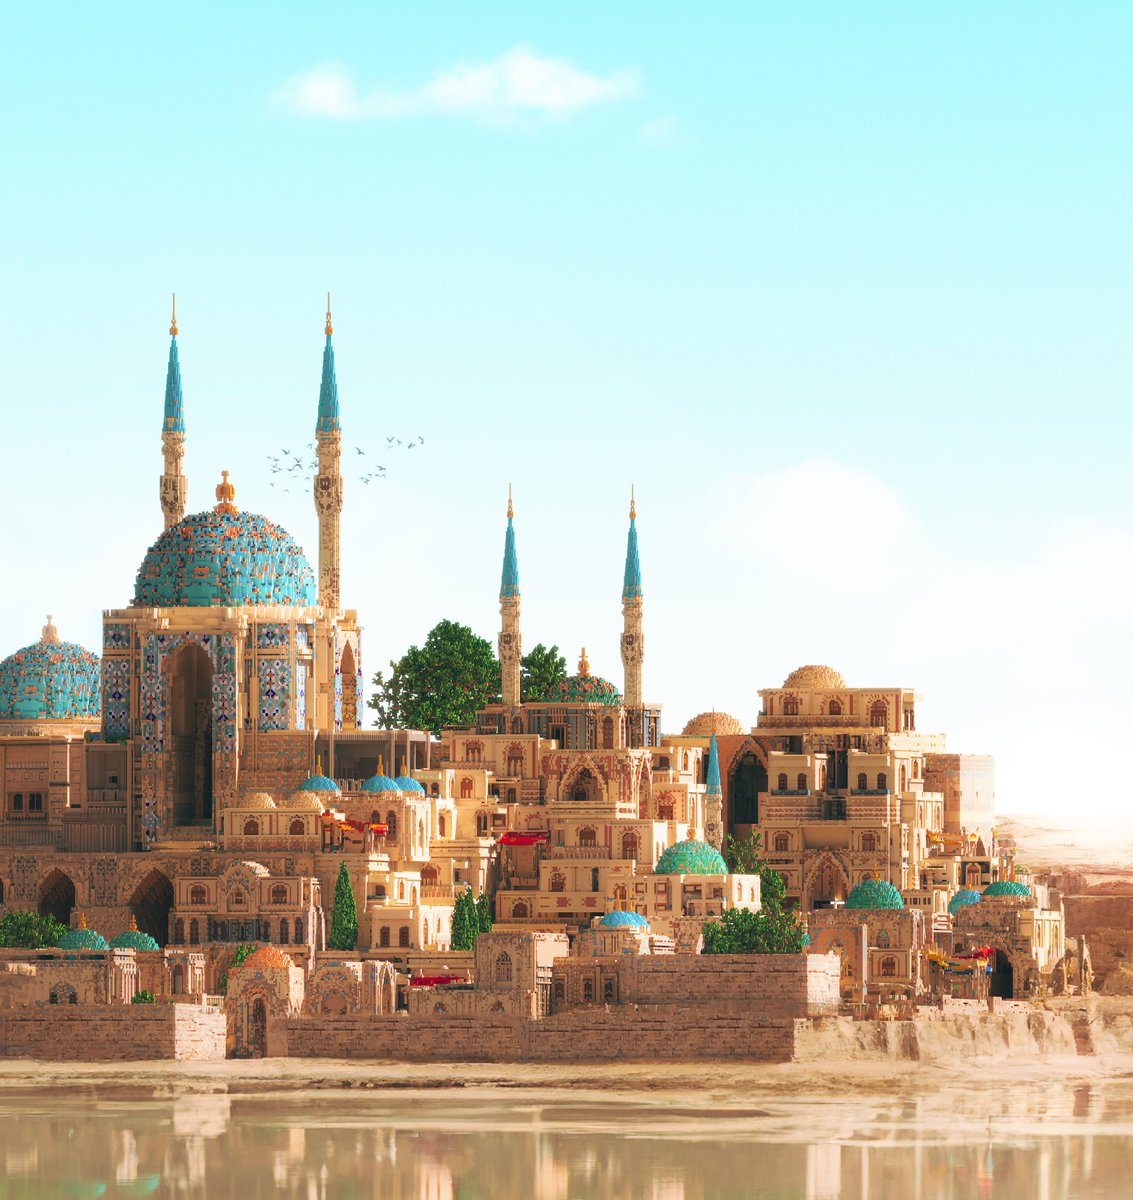 In the golden light of a calm summer in Niriya, Queen Leila wrote in her diary: 'Sunlight dances on our cubic city, filling the air with fragrant whispers. Peace reigns today, yet tomorrow may hold untold stories.' #VoxelArt